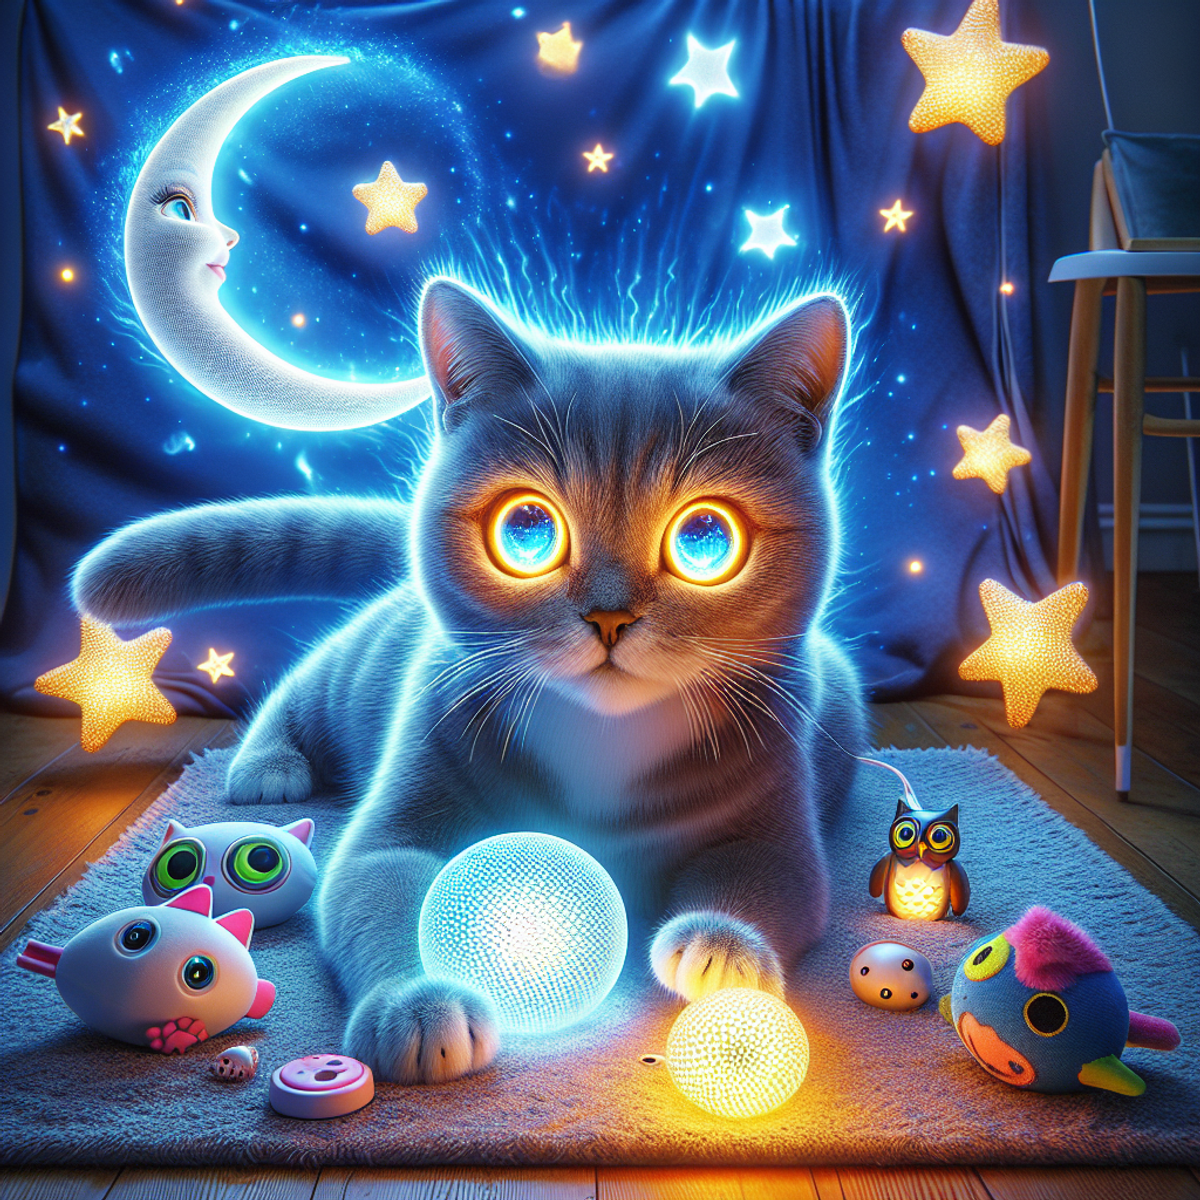 A playful black cat with glowing eyes pouncing on a star-shaped toy in a dimly lit room.